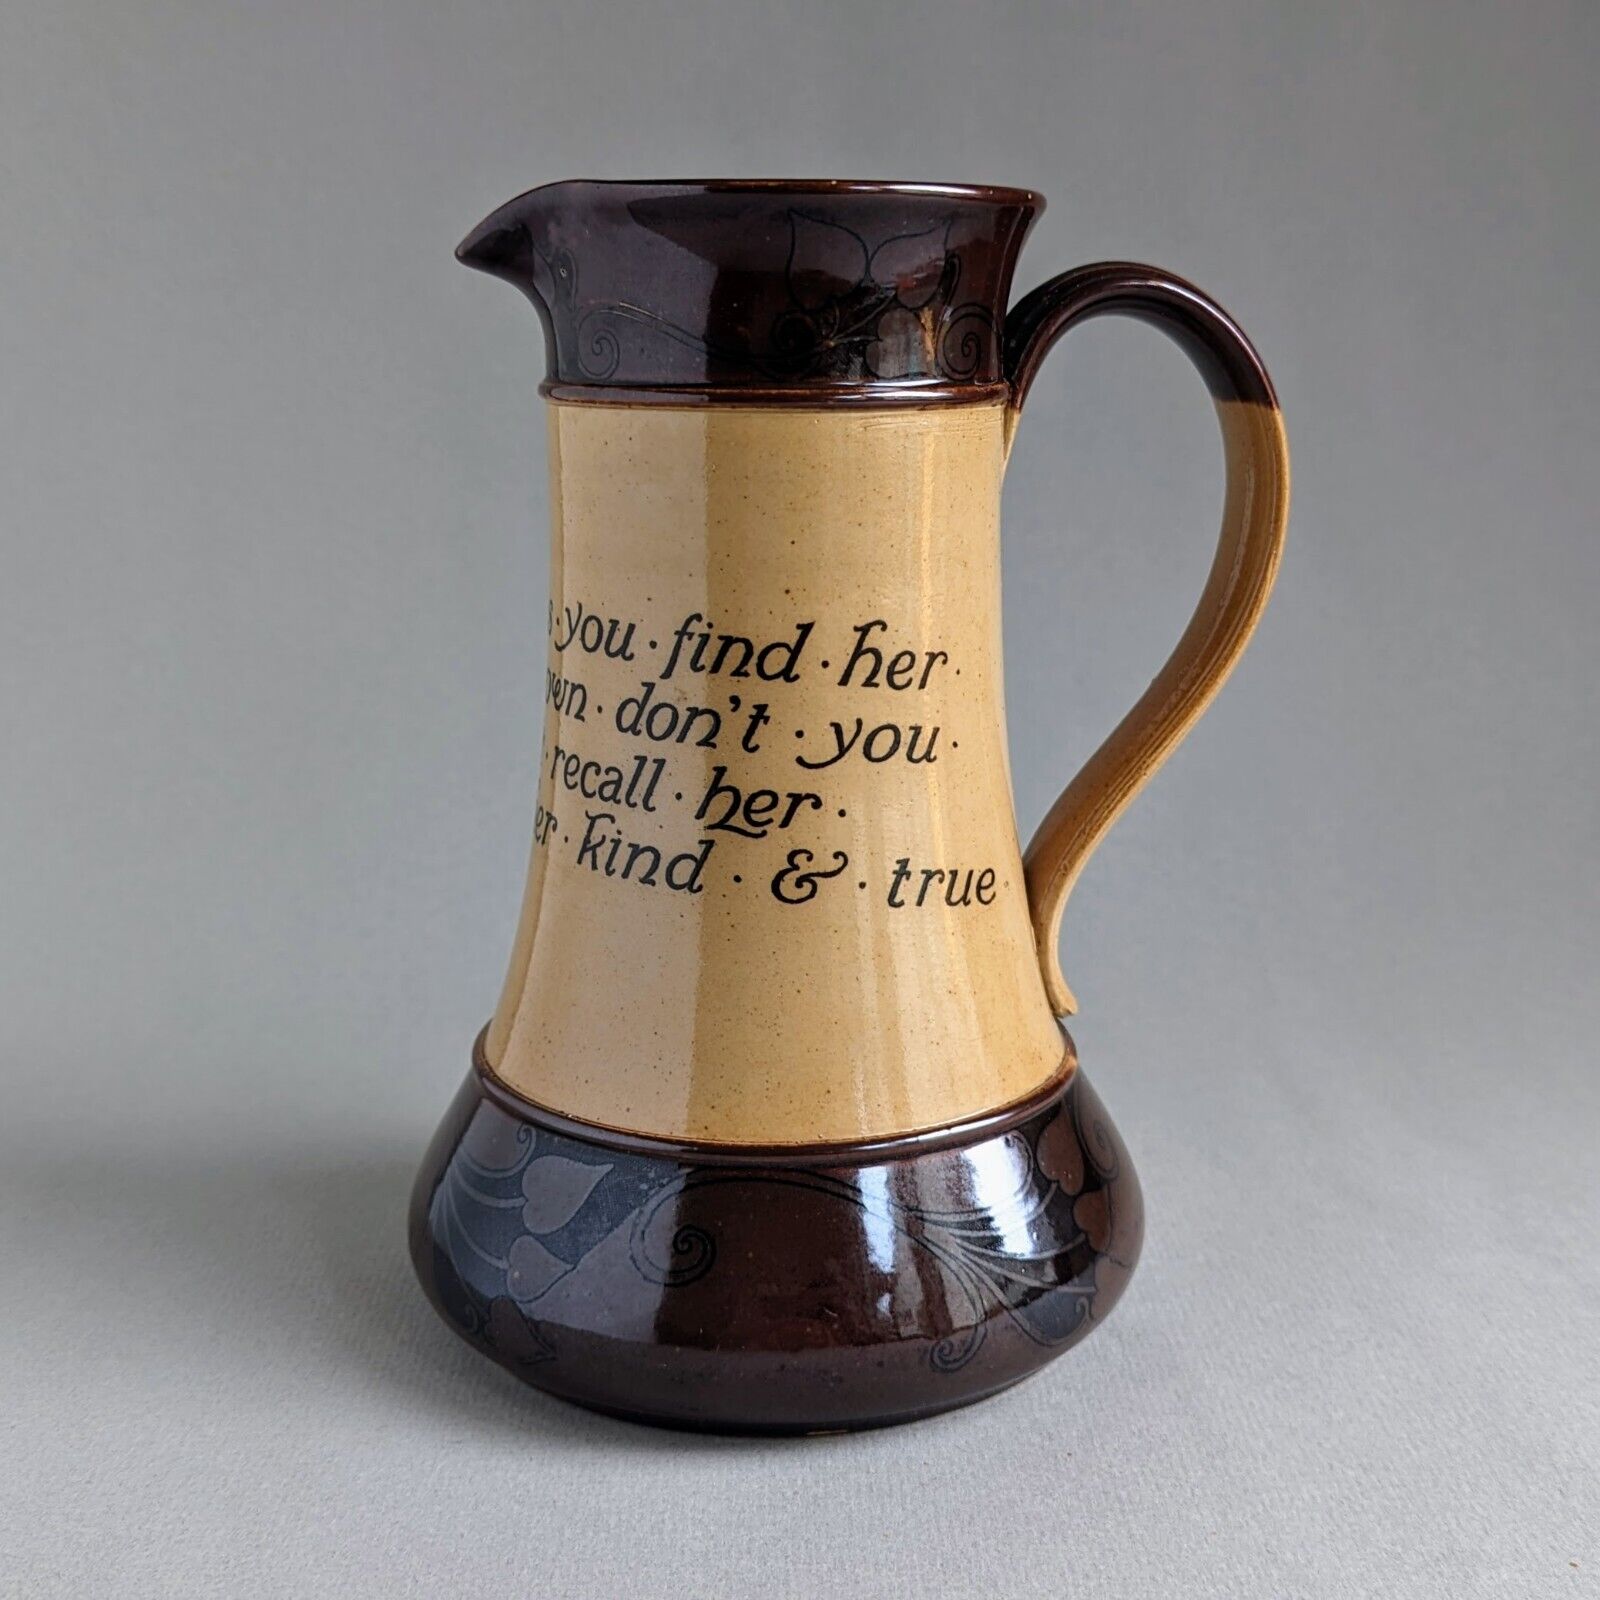 Ale Pitcher ROYAL DOULTON STONEWARE with Motto Antique Early 1900s English #2506